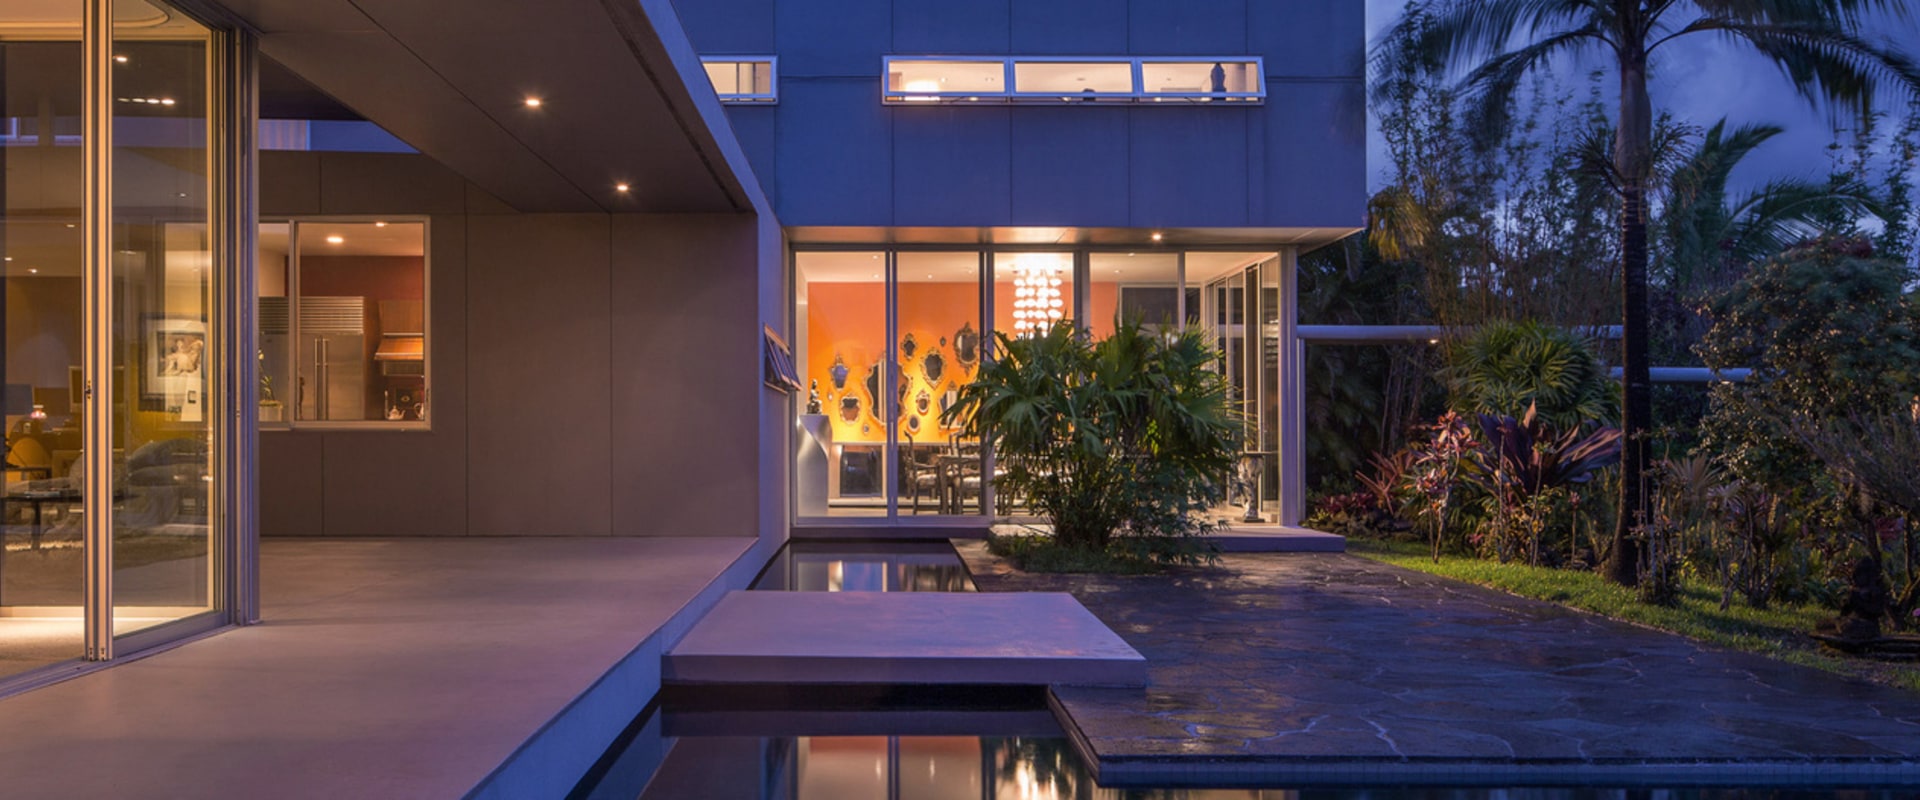 How to Master Exterior Architectural Photography